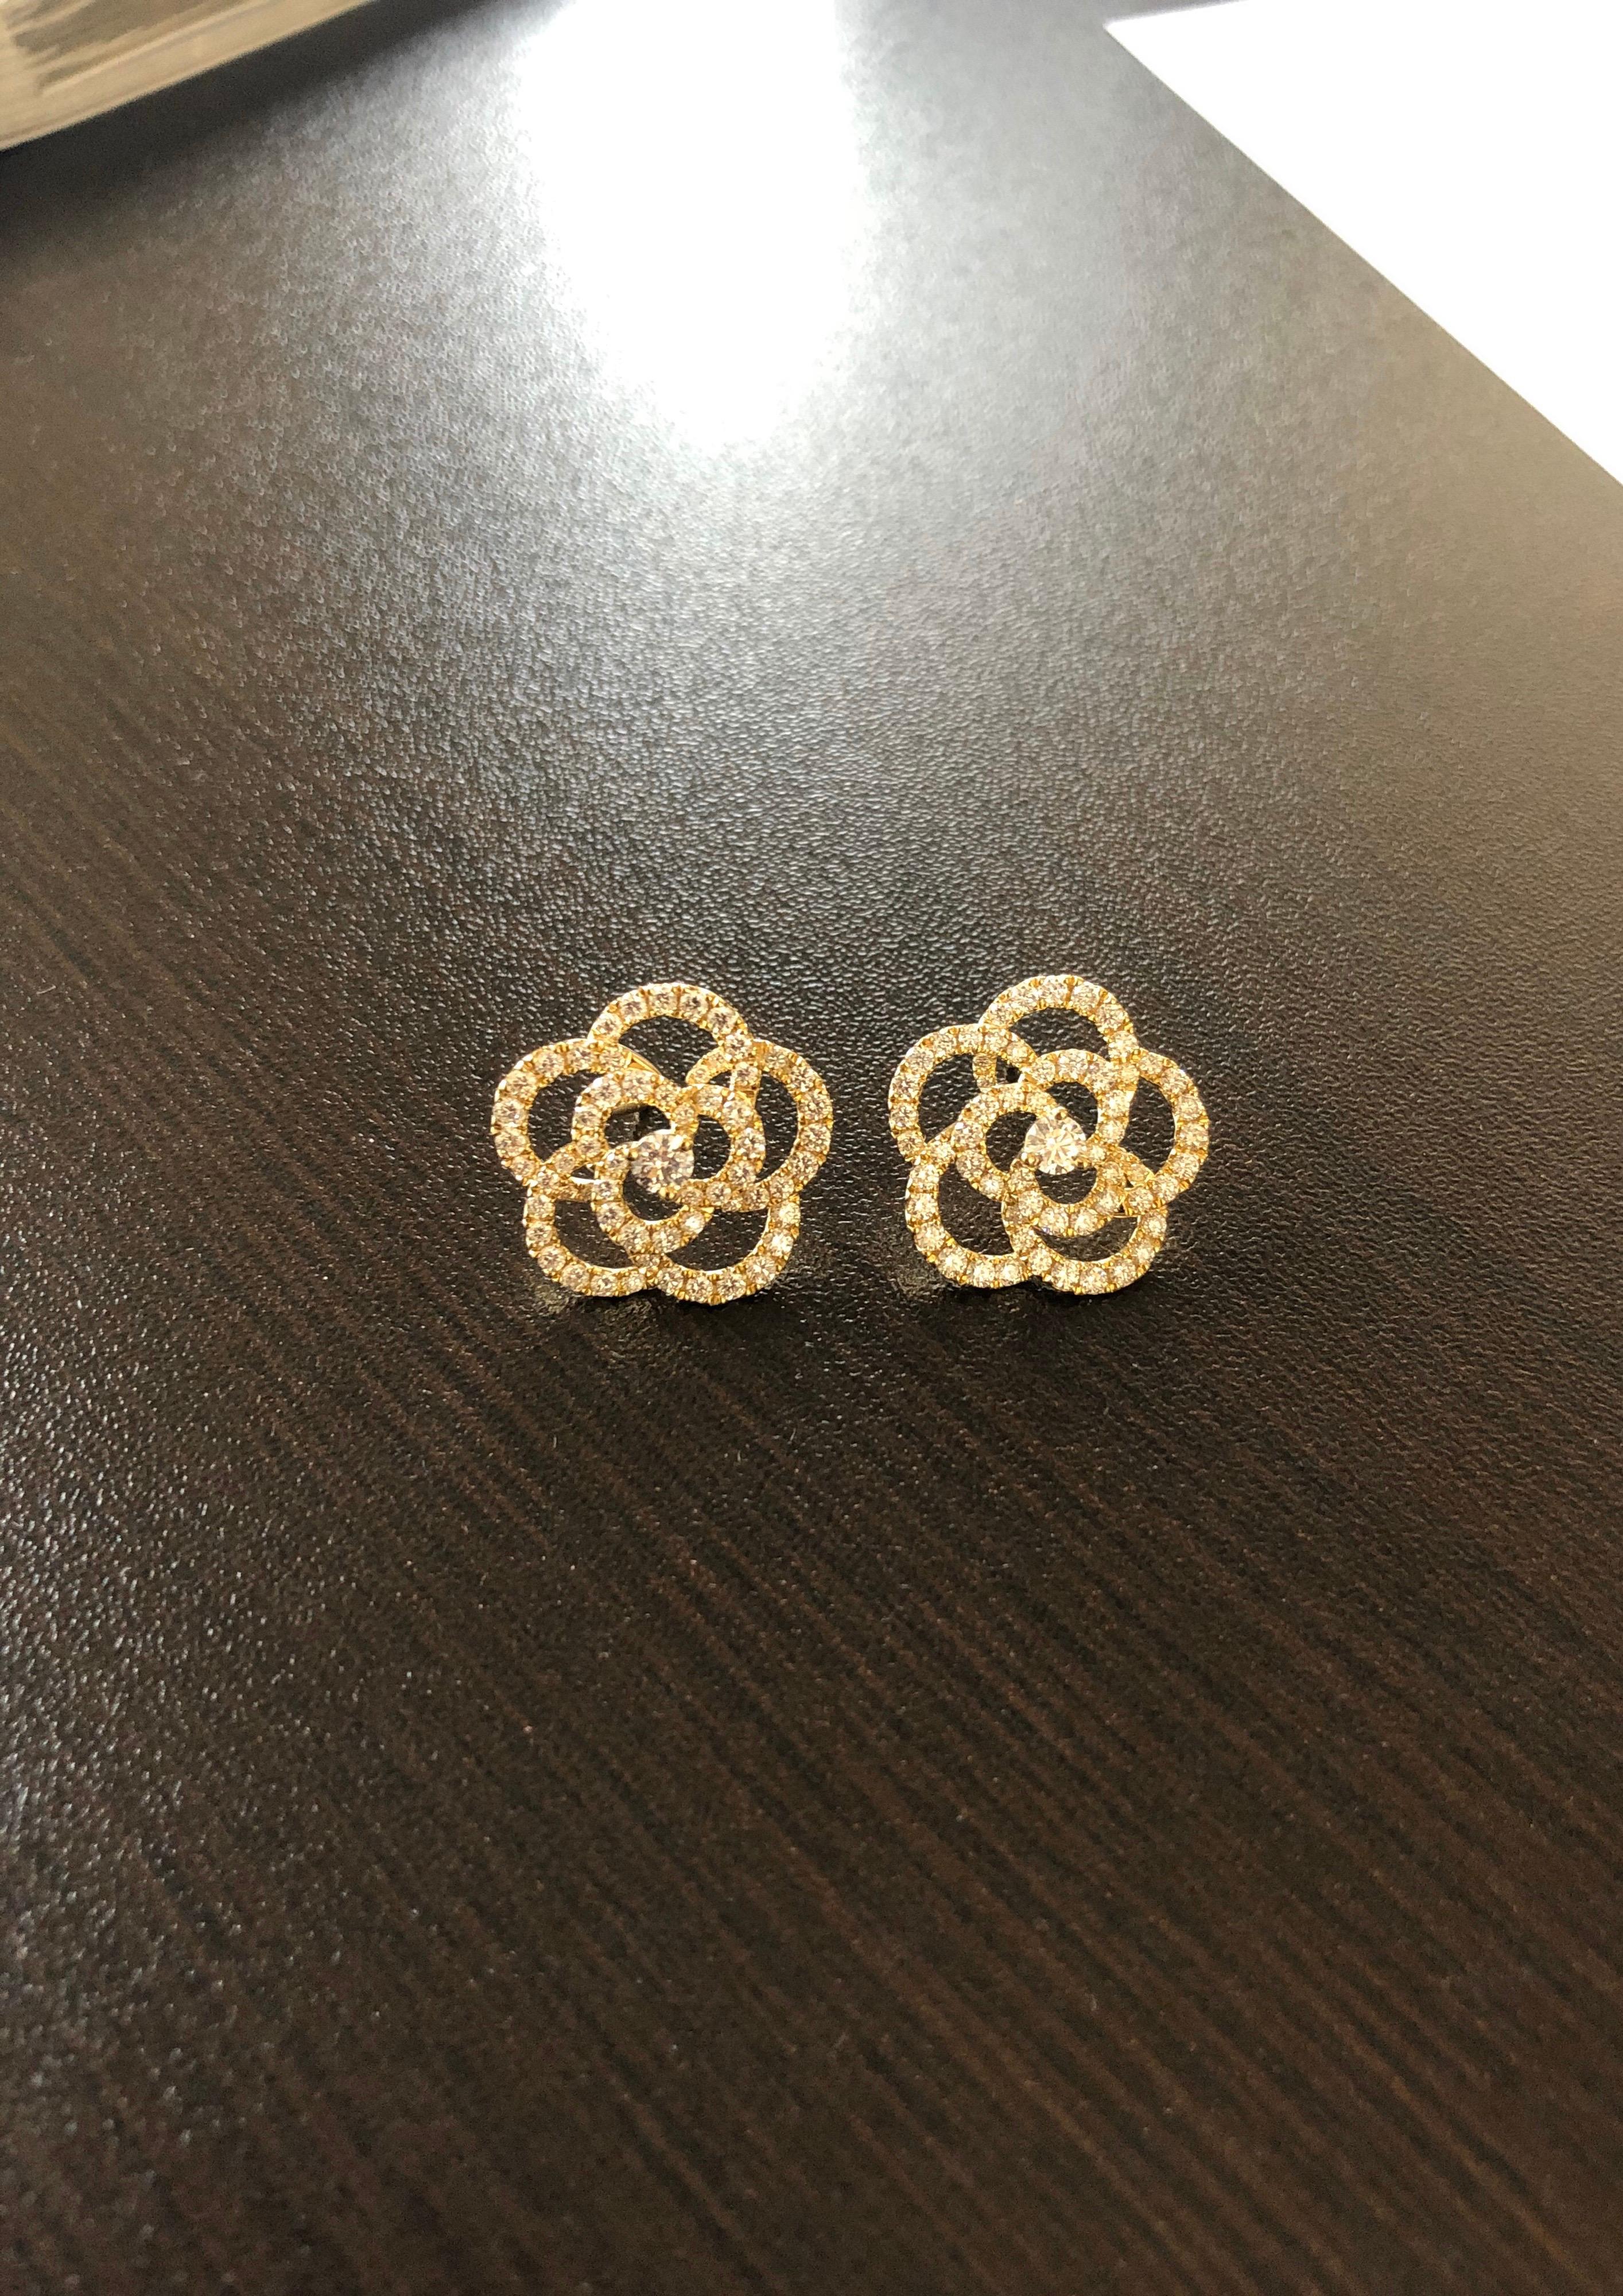 Italian made diamond Earrings set in 18K yellow gold. The carat weight of the earrings is 1.96. The color of the stones are F-G, the clarity is VS1-VS2. The earrings are available in 18K white and rose gold.